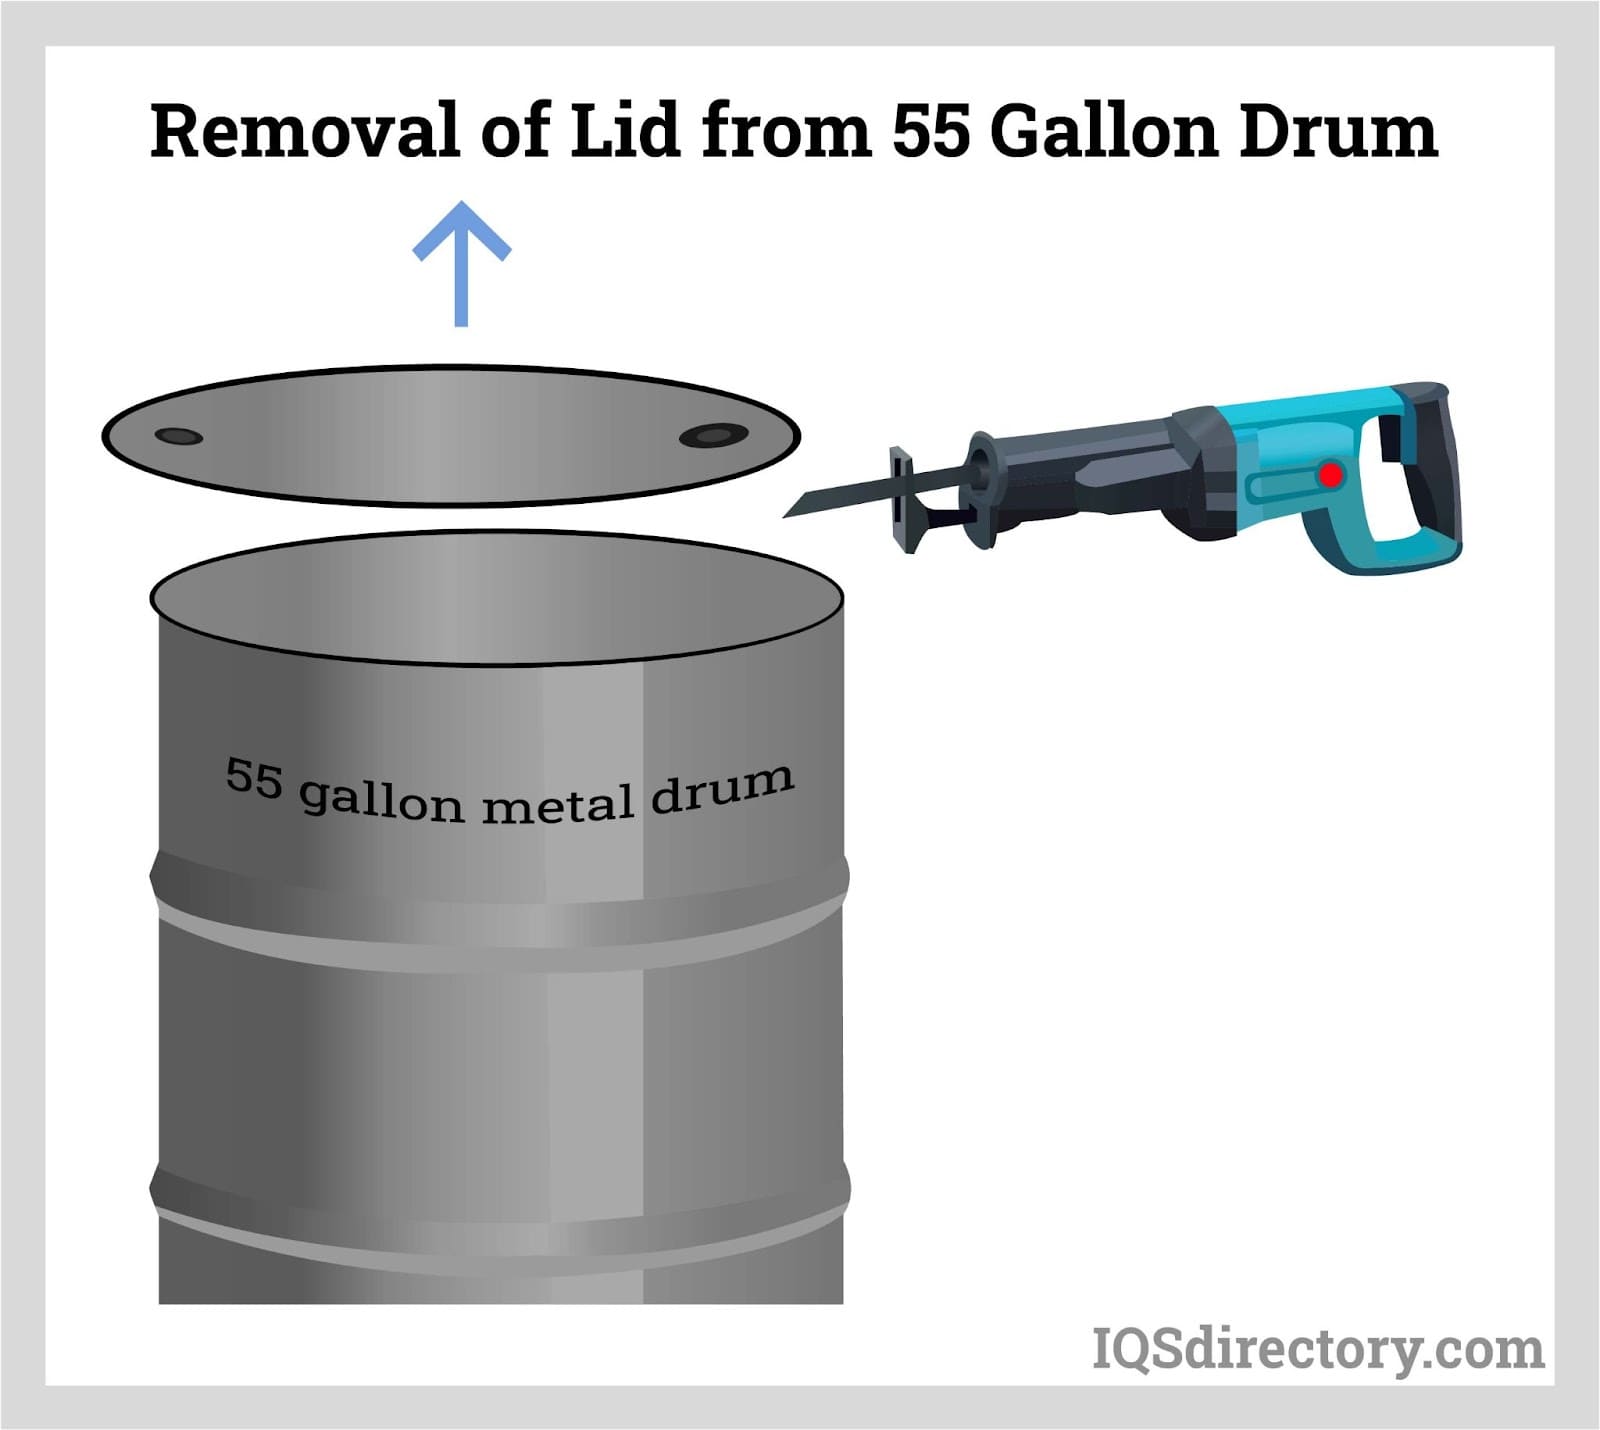 Removal of Lid from 55 Gallon Drum